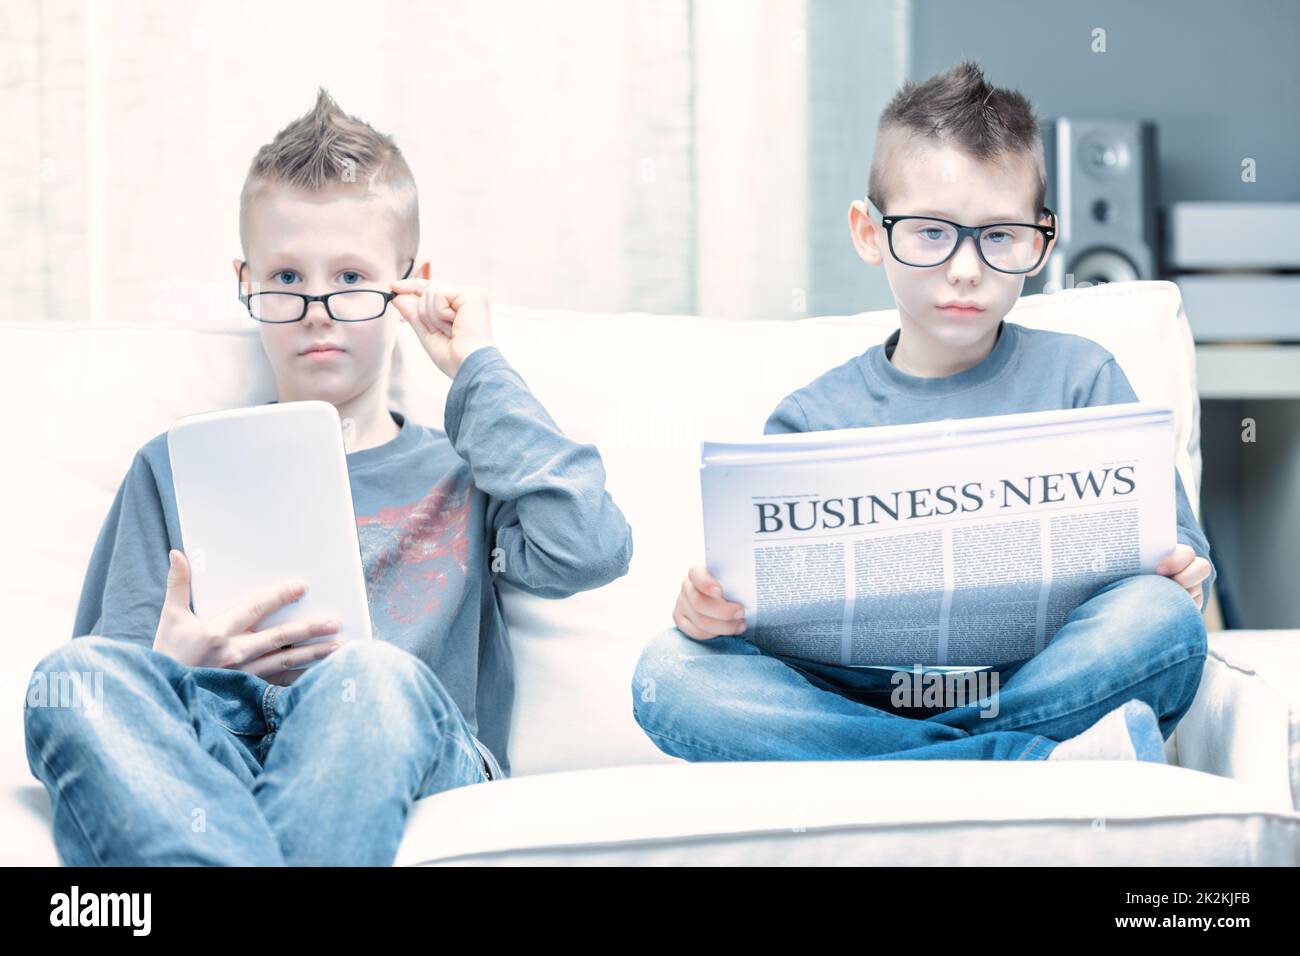 Spoof of two young boys wearing glasses posing as businessmen Stock Photo